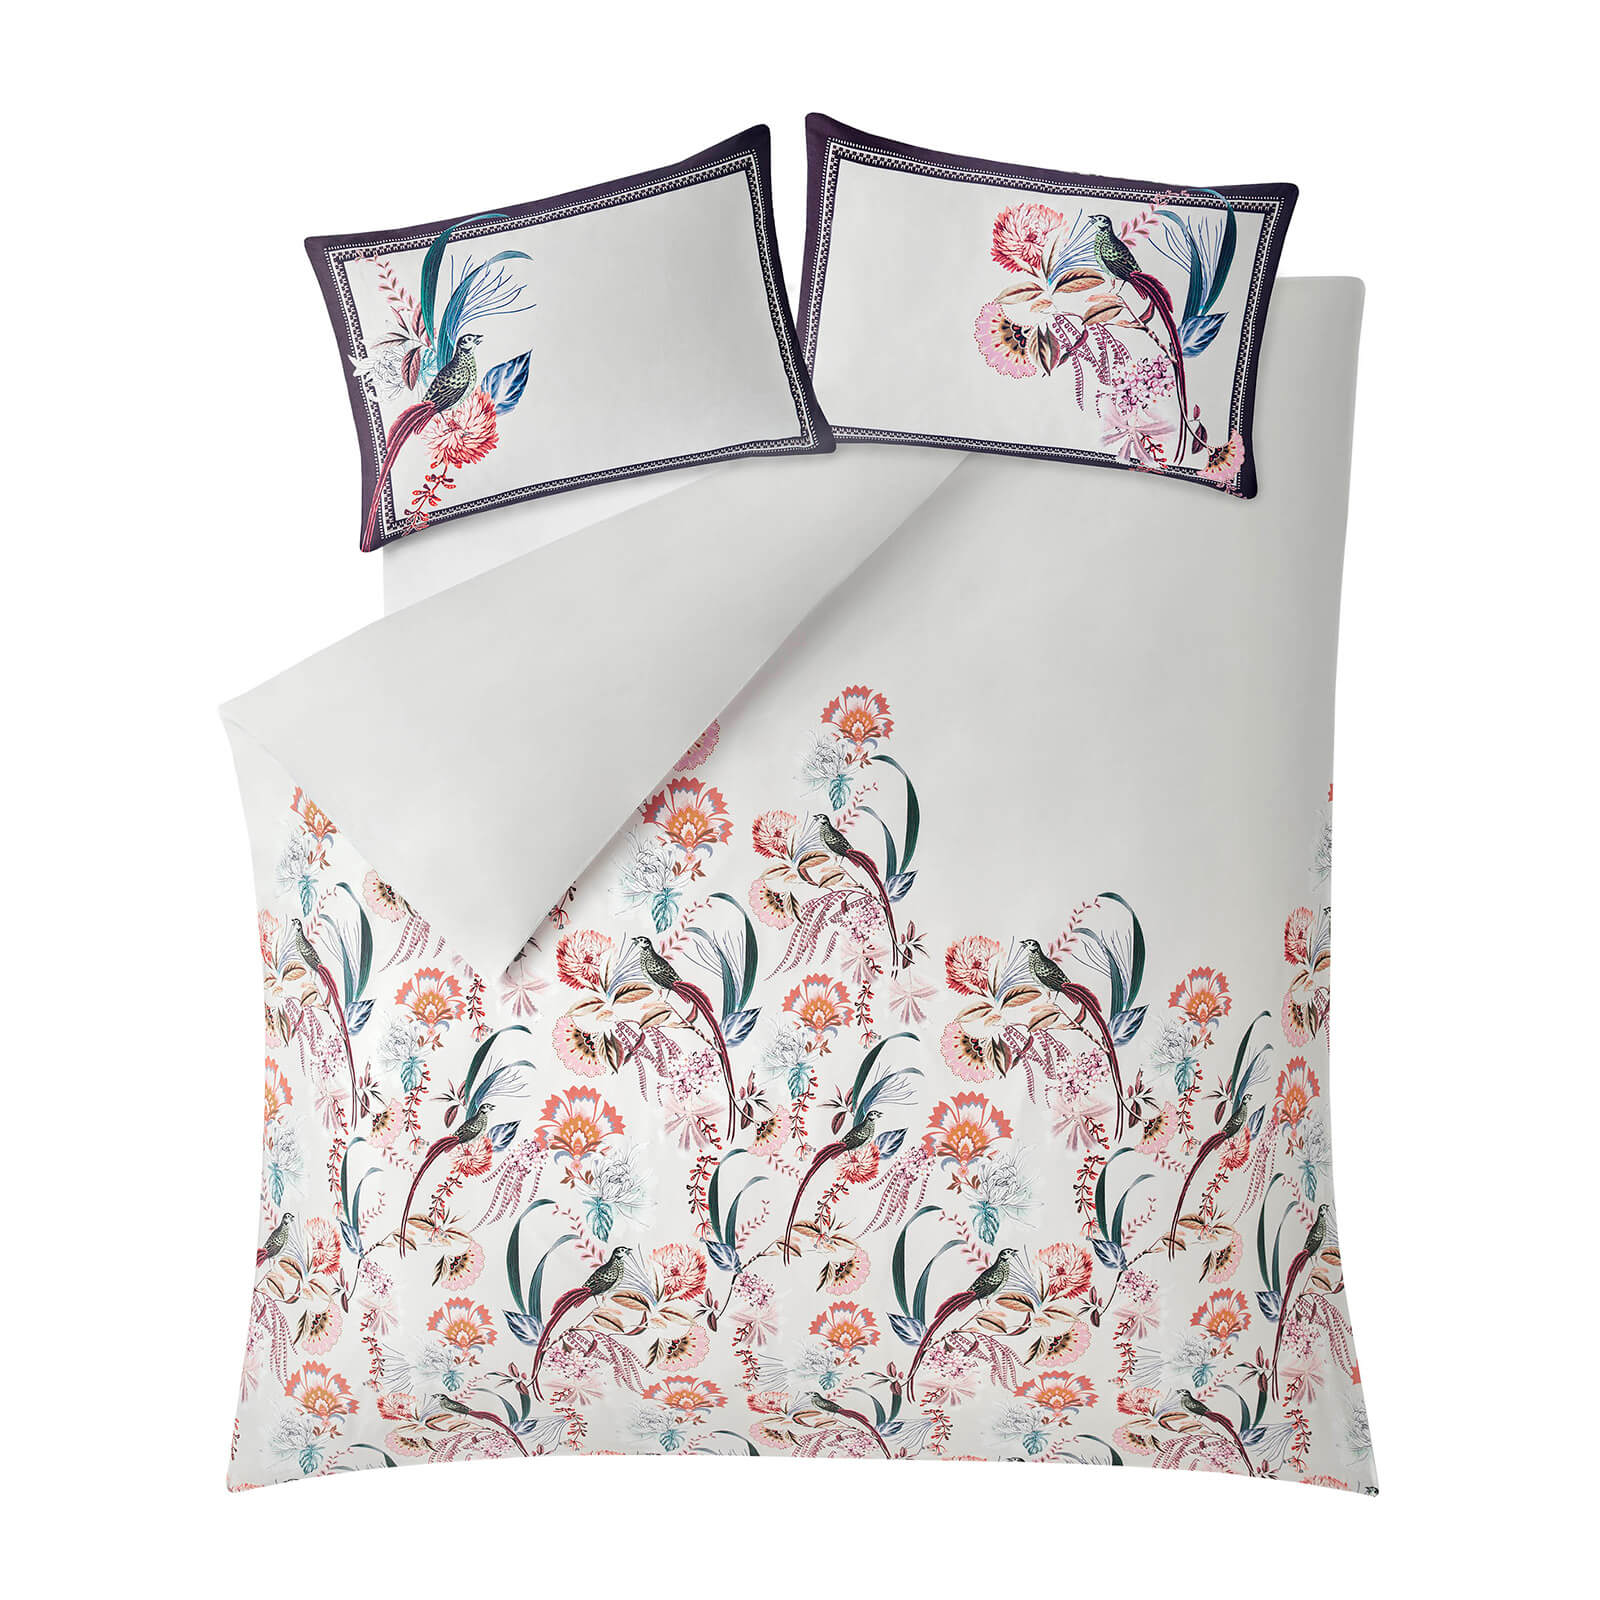 Ted Baker Decadence Duvet Cover - Double